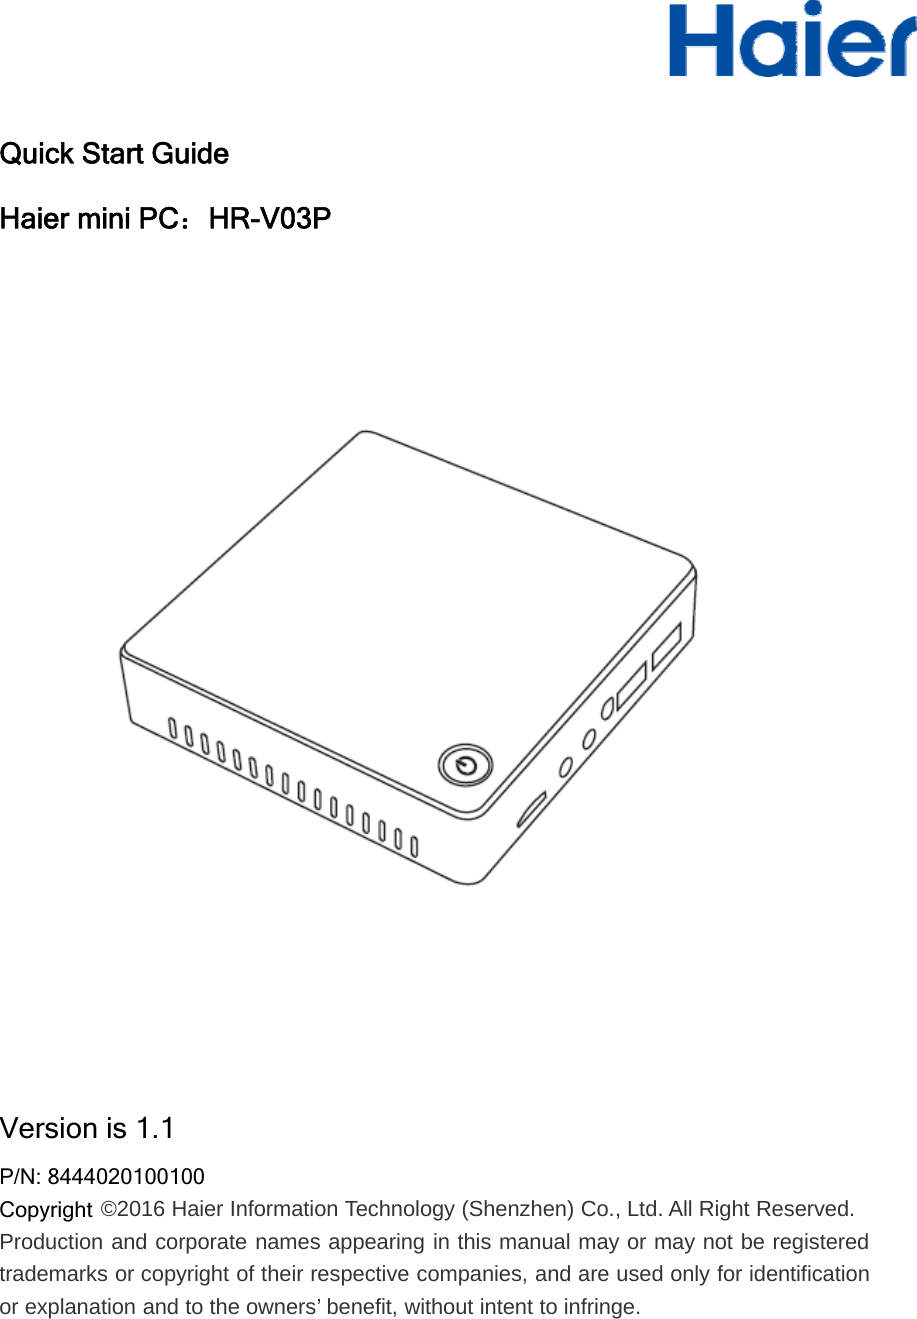 Quick Start GuideHaier mini PC：HR-V03PVersion is 1.1P/N: 8444020100100Copyright ©2016 Haier Information Technology (Shenzhen) Co., Ltd. All Right Reserved.Production and corporate names appearing in this manual may or may not be registeredtrademarks or copyright of their respective companies, and are used only for identificationor explanation and to the owners’ benefit, without intent to infringe.